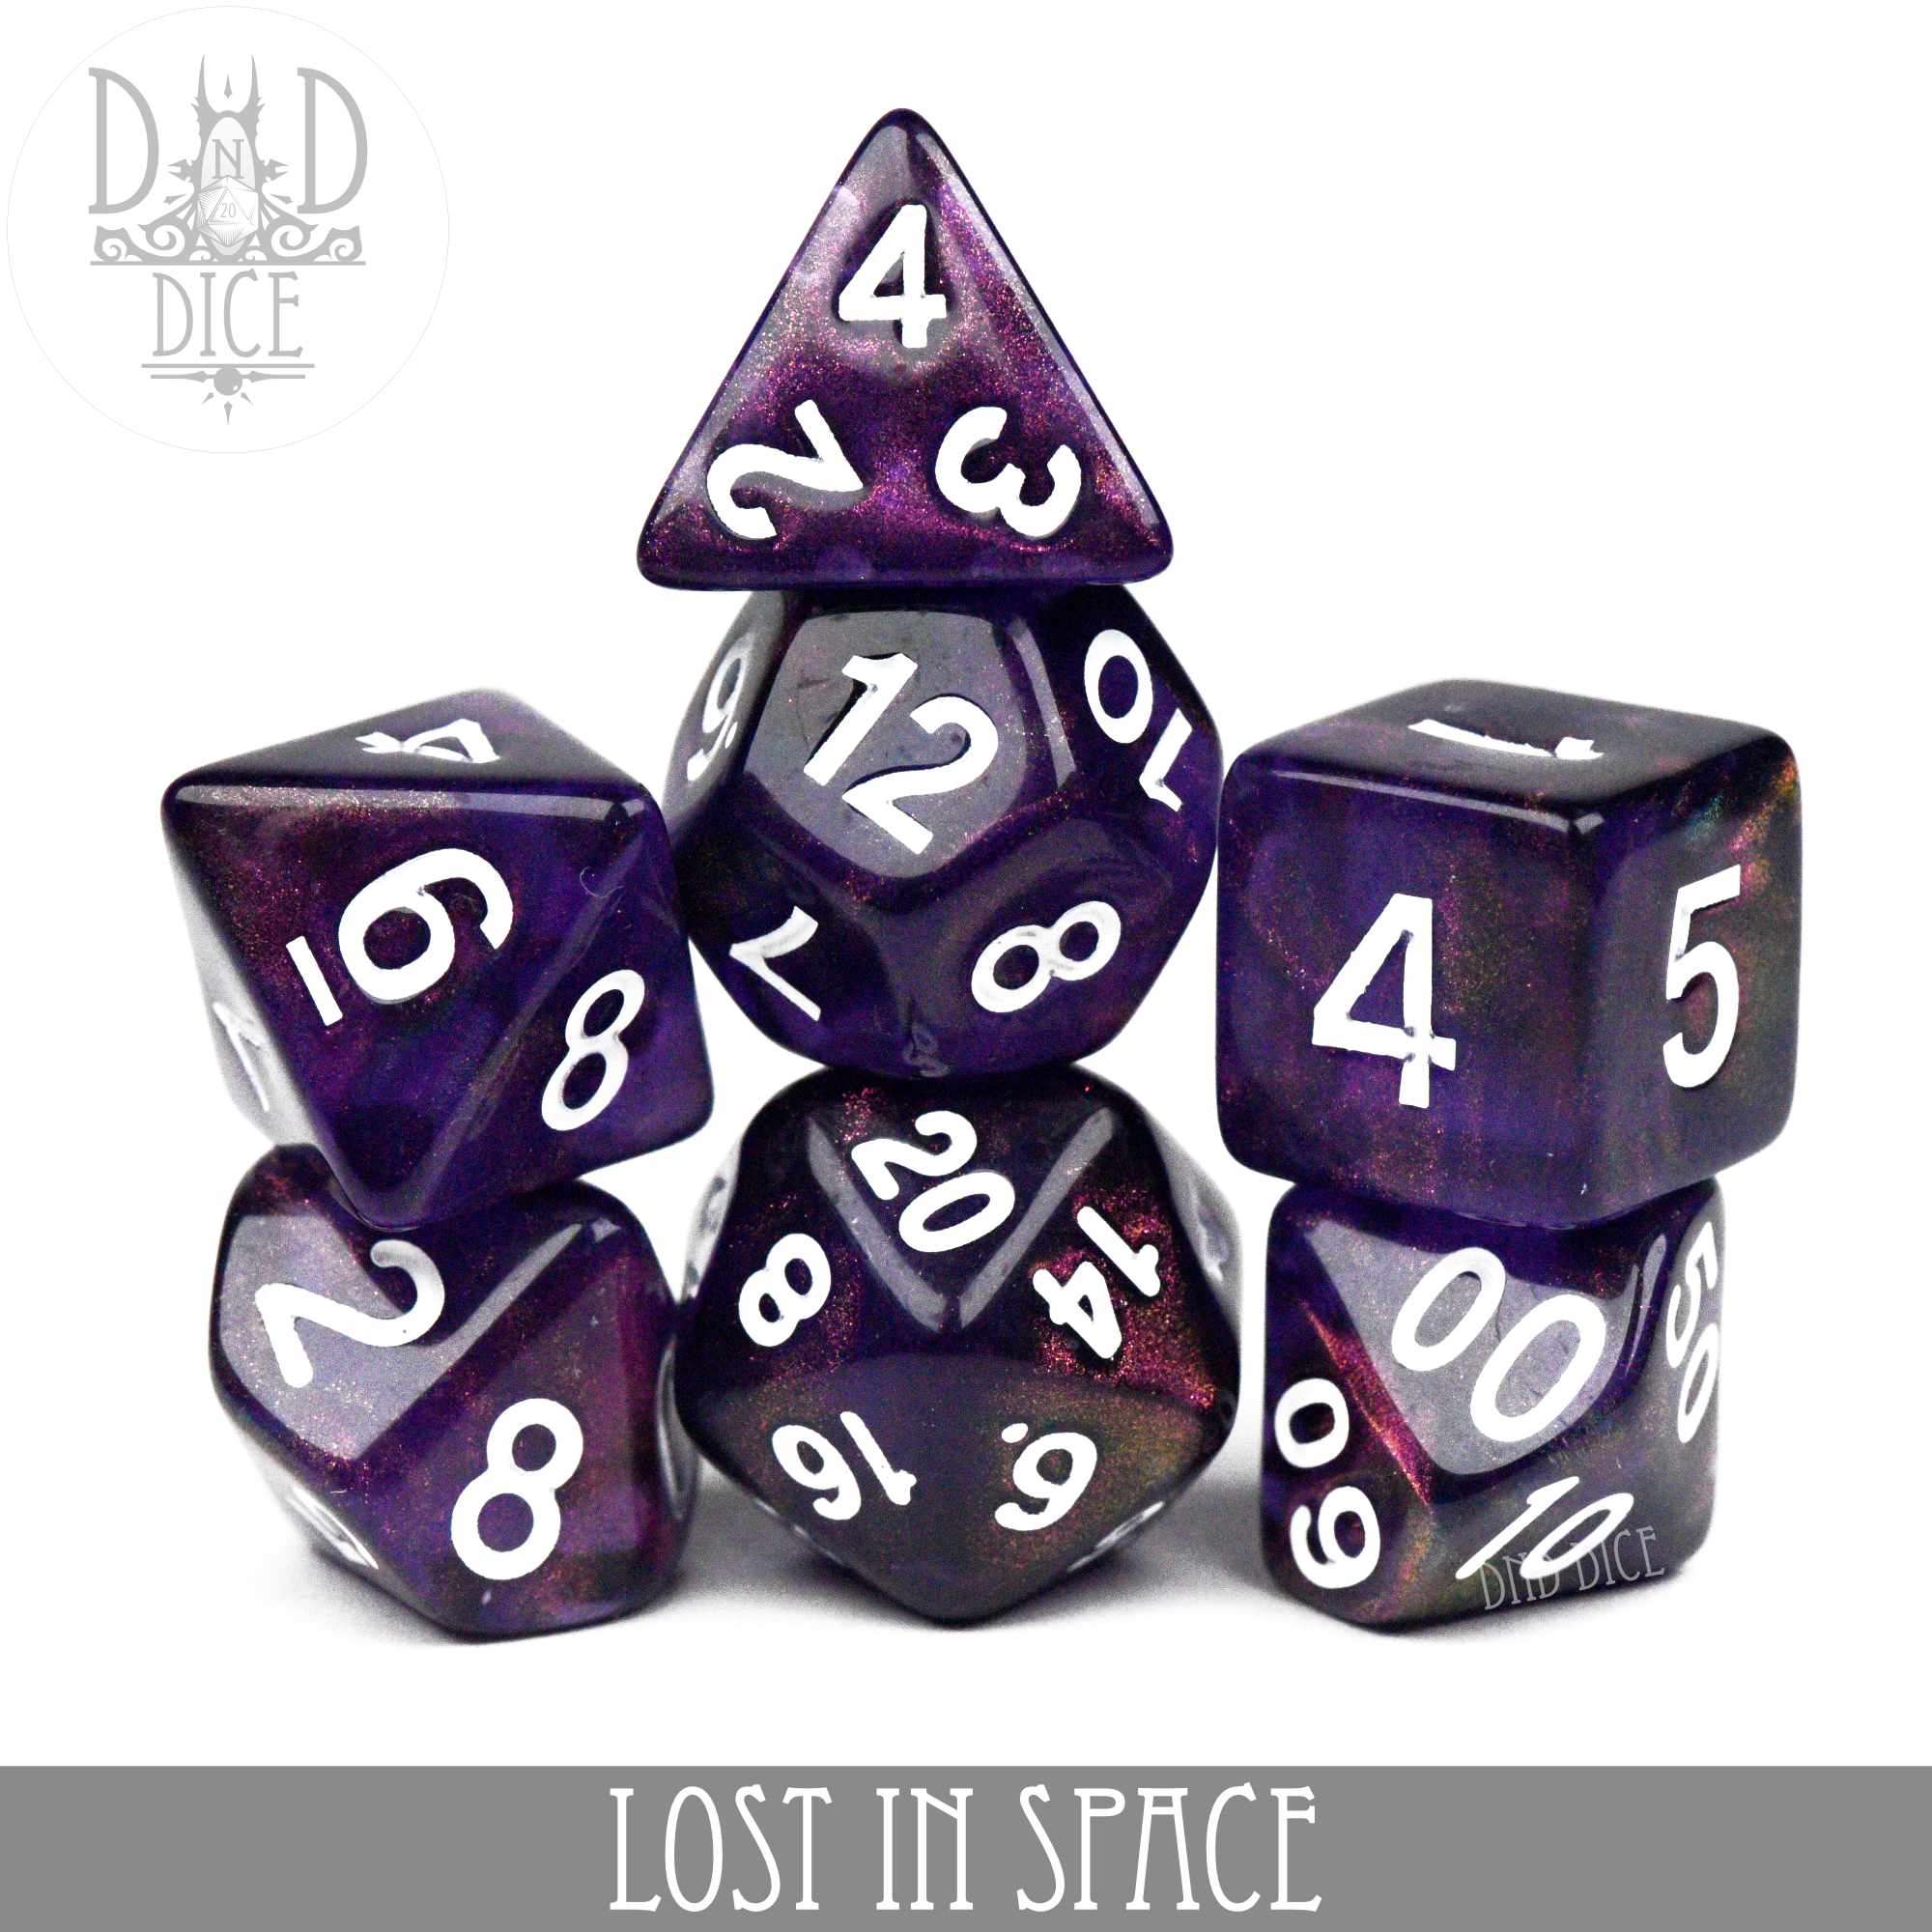 Lost in Space Dice Set